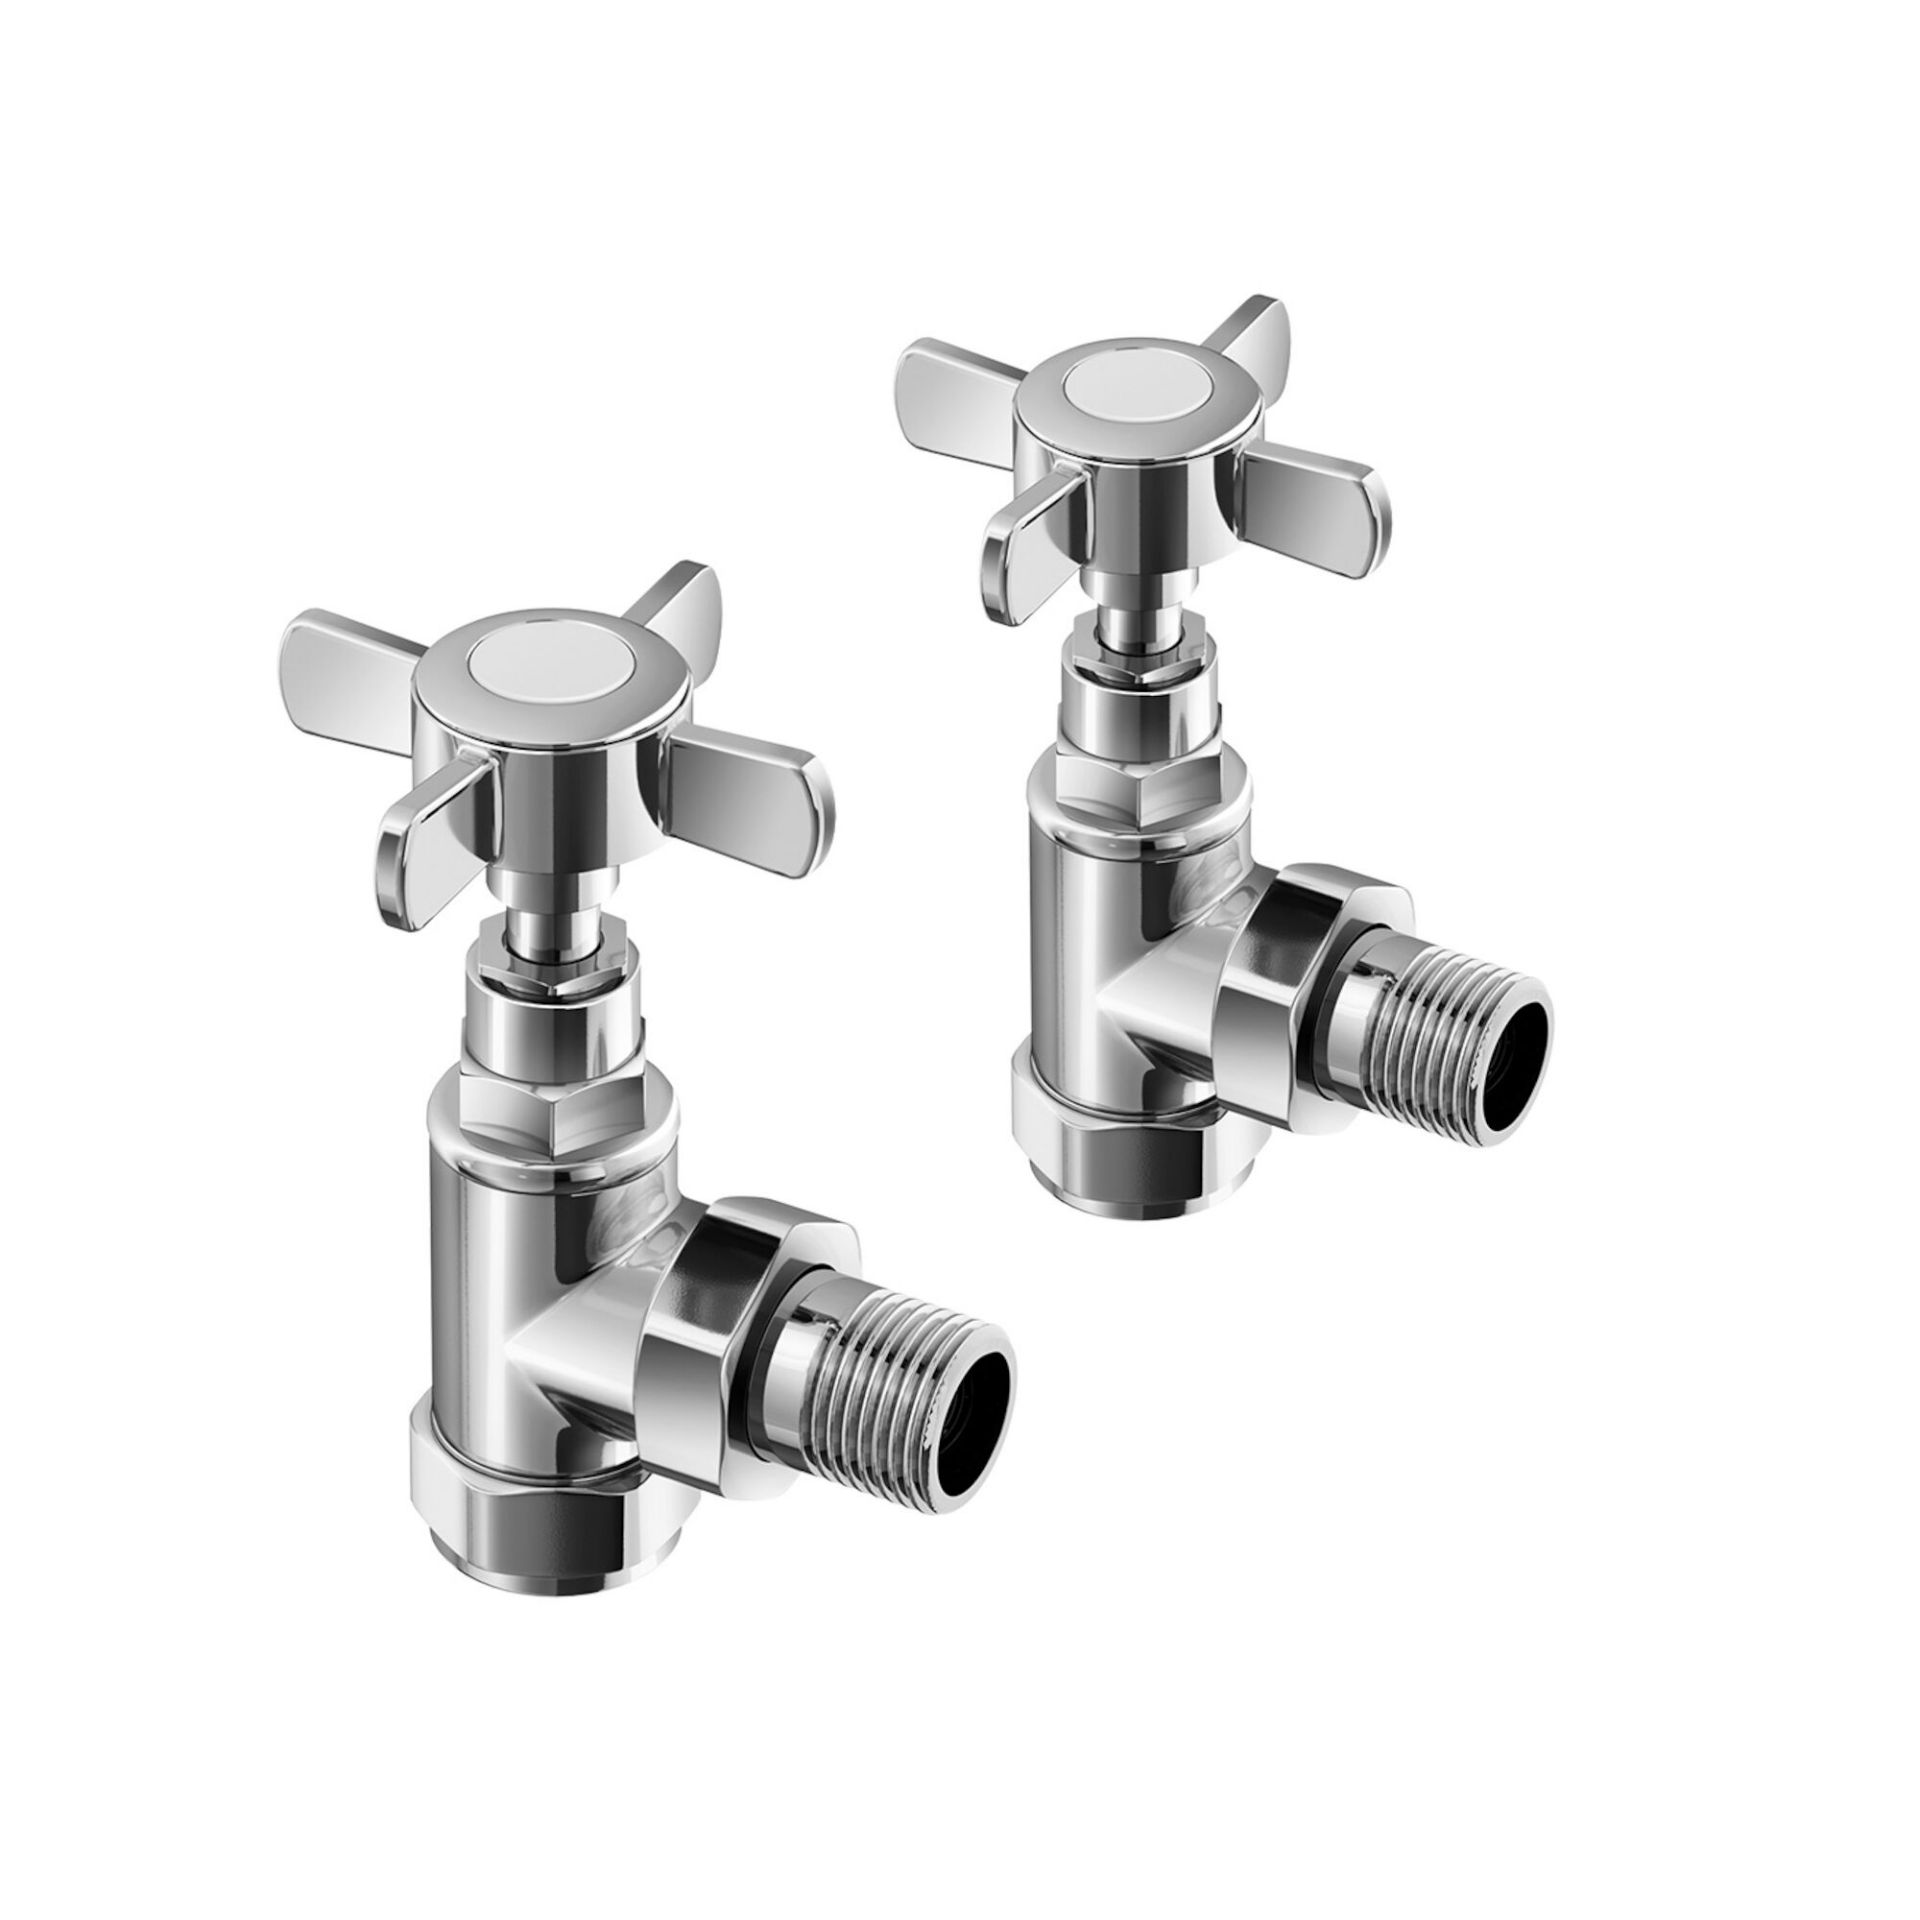 (R1037) 15mm Standard Connection Angled Polished Chrome Radiator Valves Chrome Plated Solid Brass